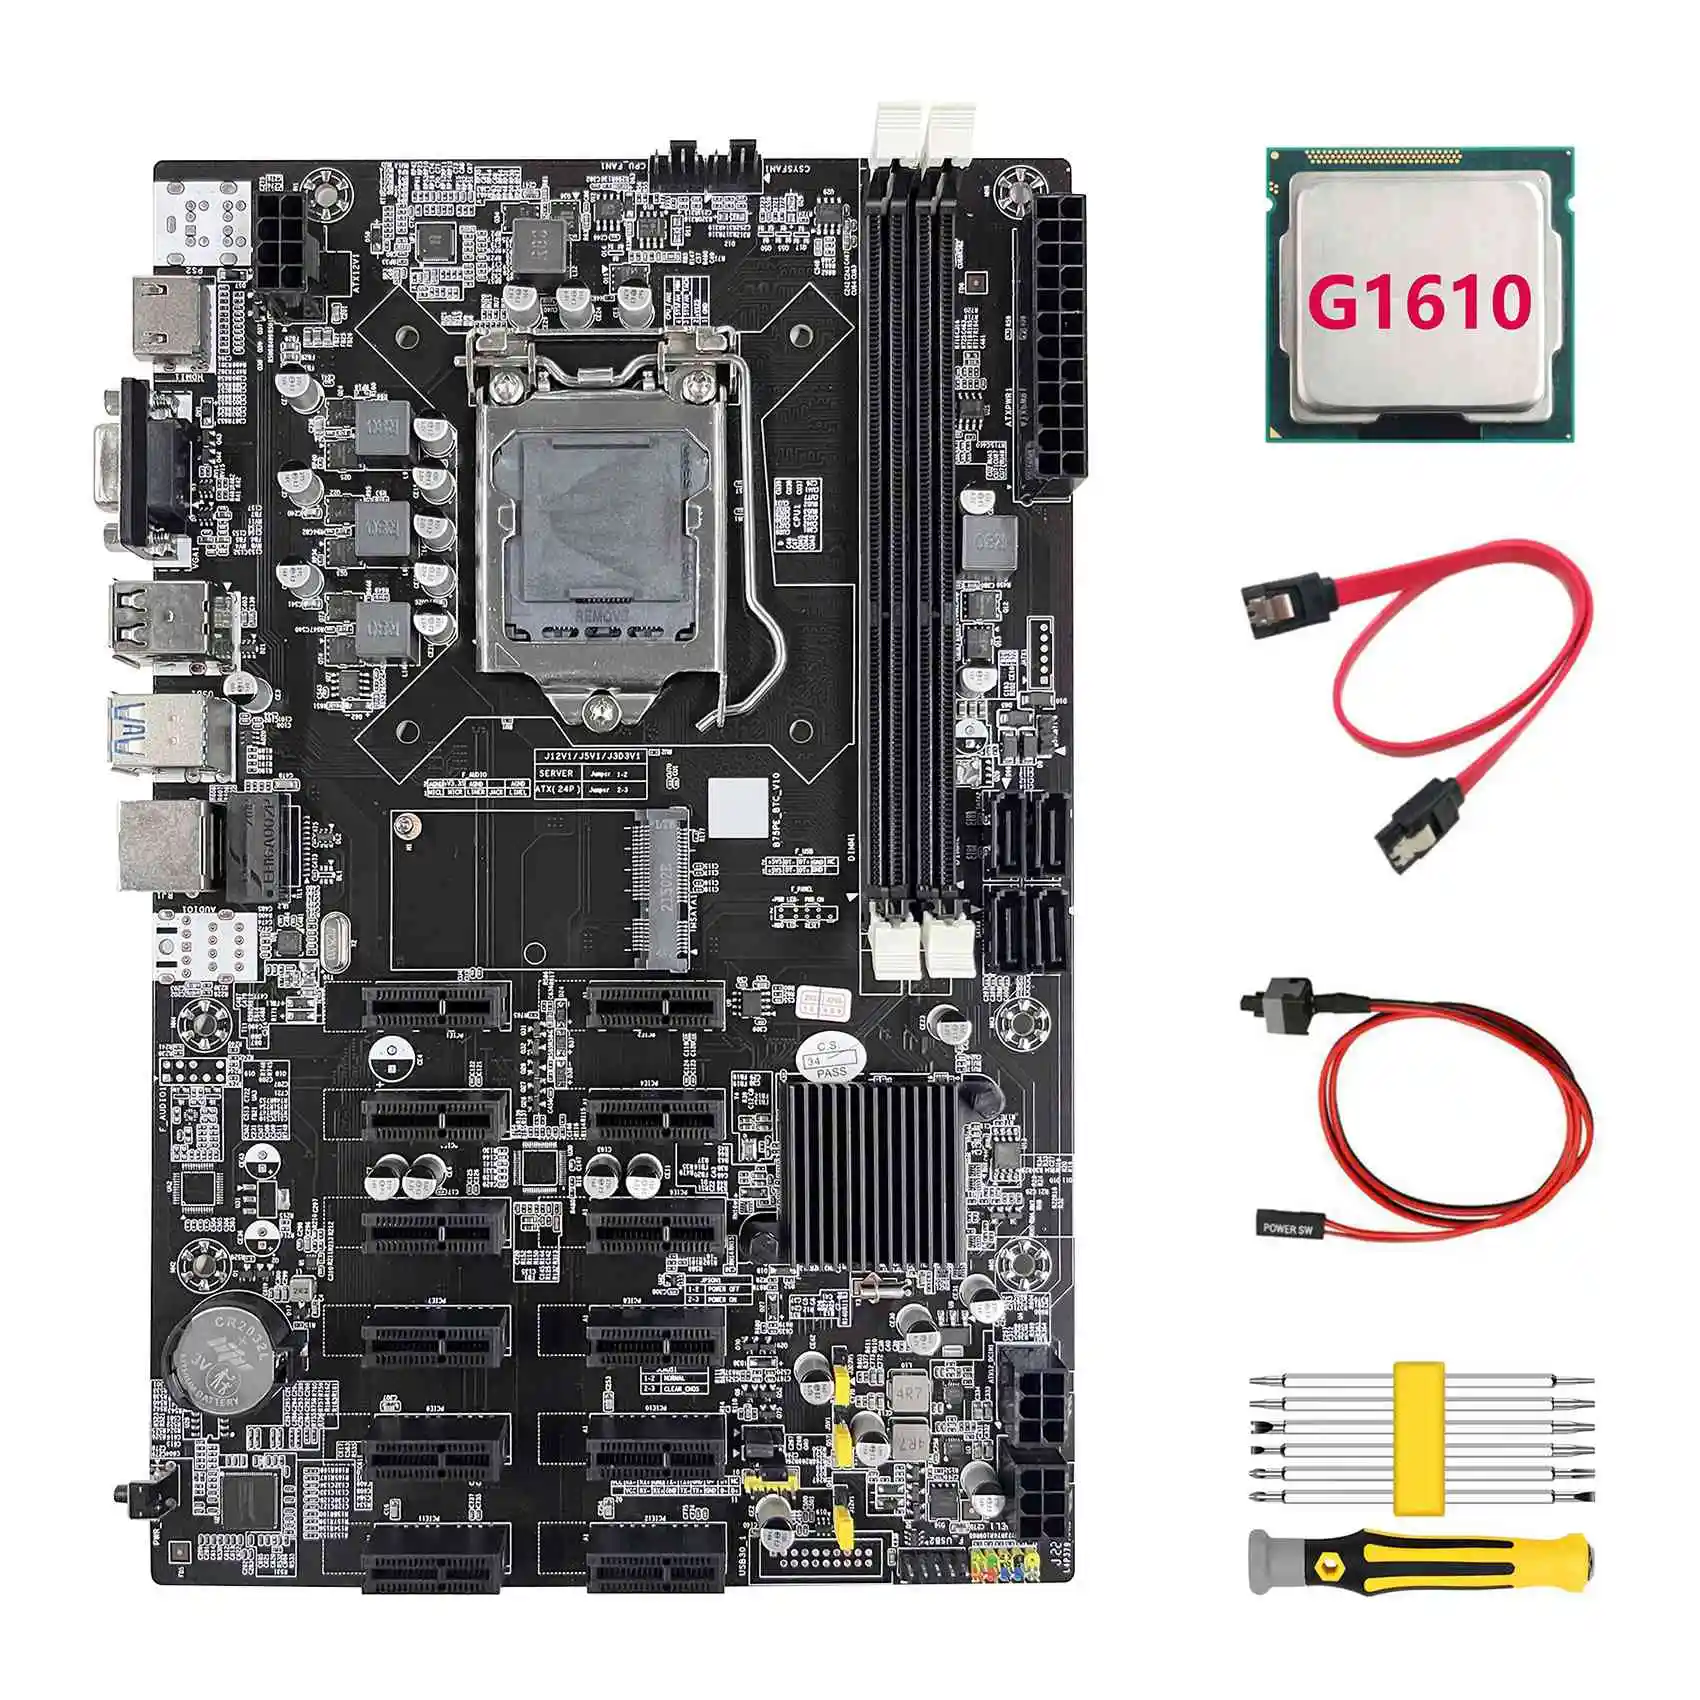 B75 ETH Mining Motherboard 12 PCIE+G1610 CPU+Screwdriver Set+SATA Cable+Switch Cable LGA1155 B75 BTC Miner Motherboard